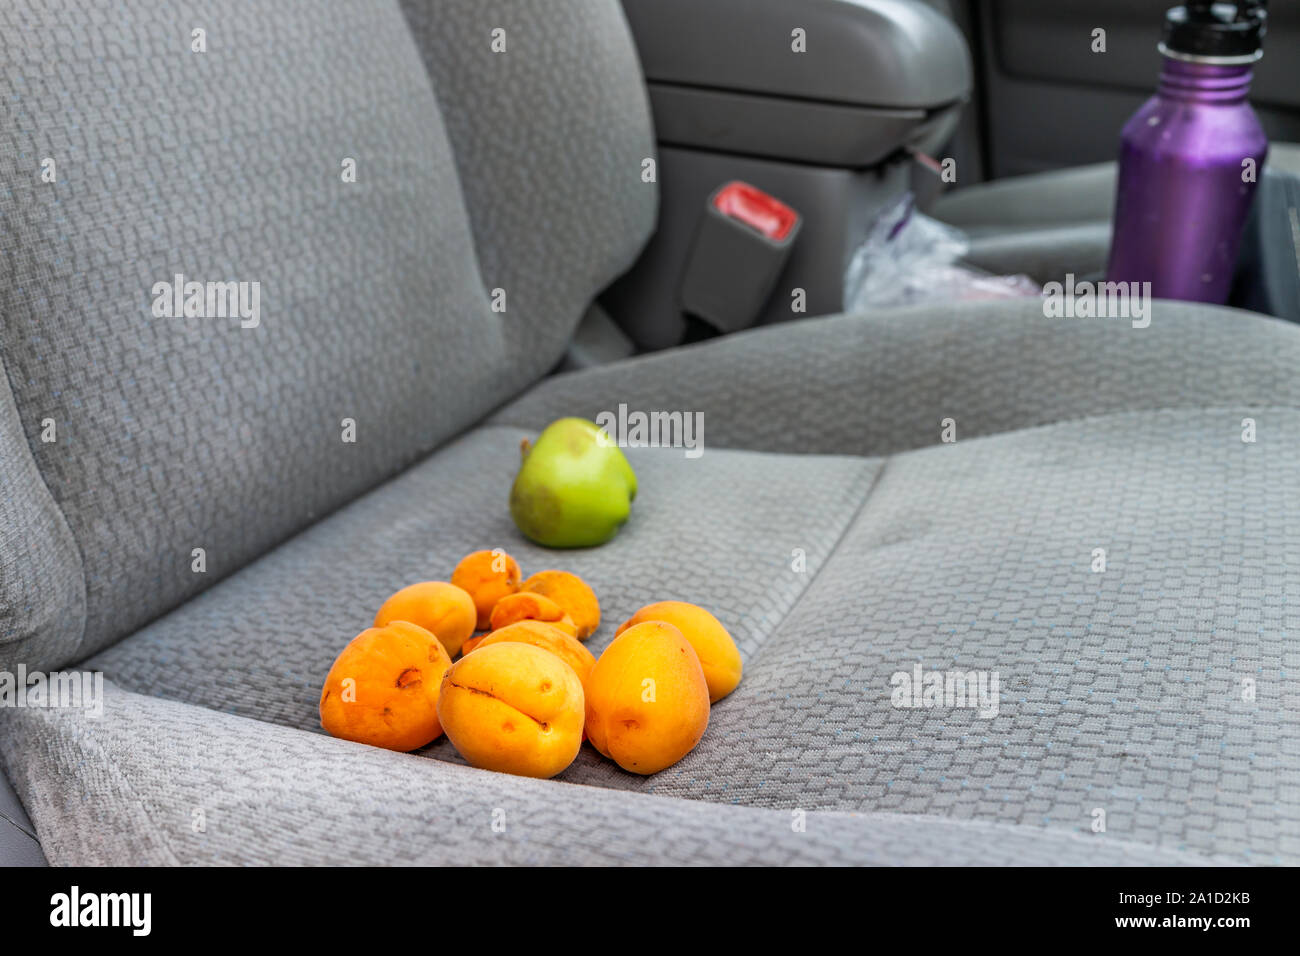 Apricots harvest of many ripe orange yellow fruit and green apple on passenger seat of car as snack on road trip with nobody Stock Photo